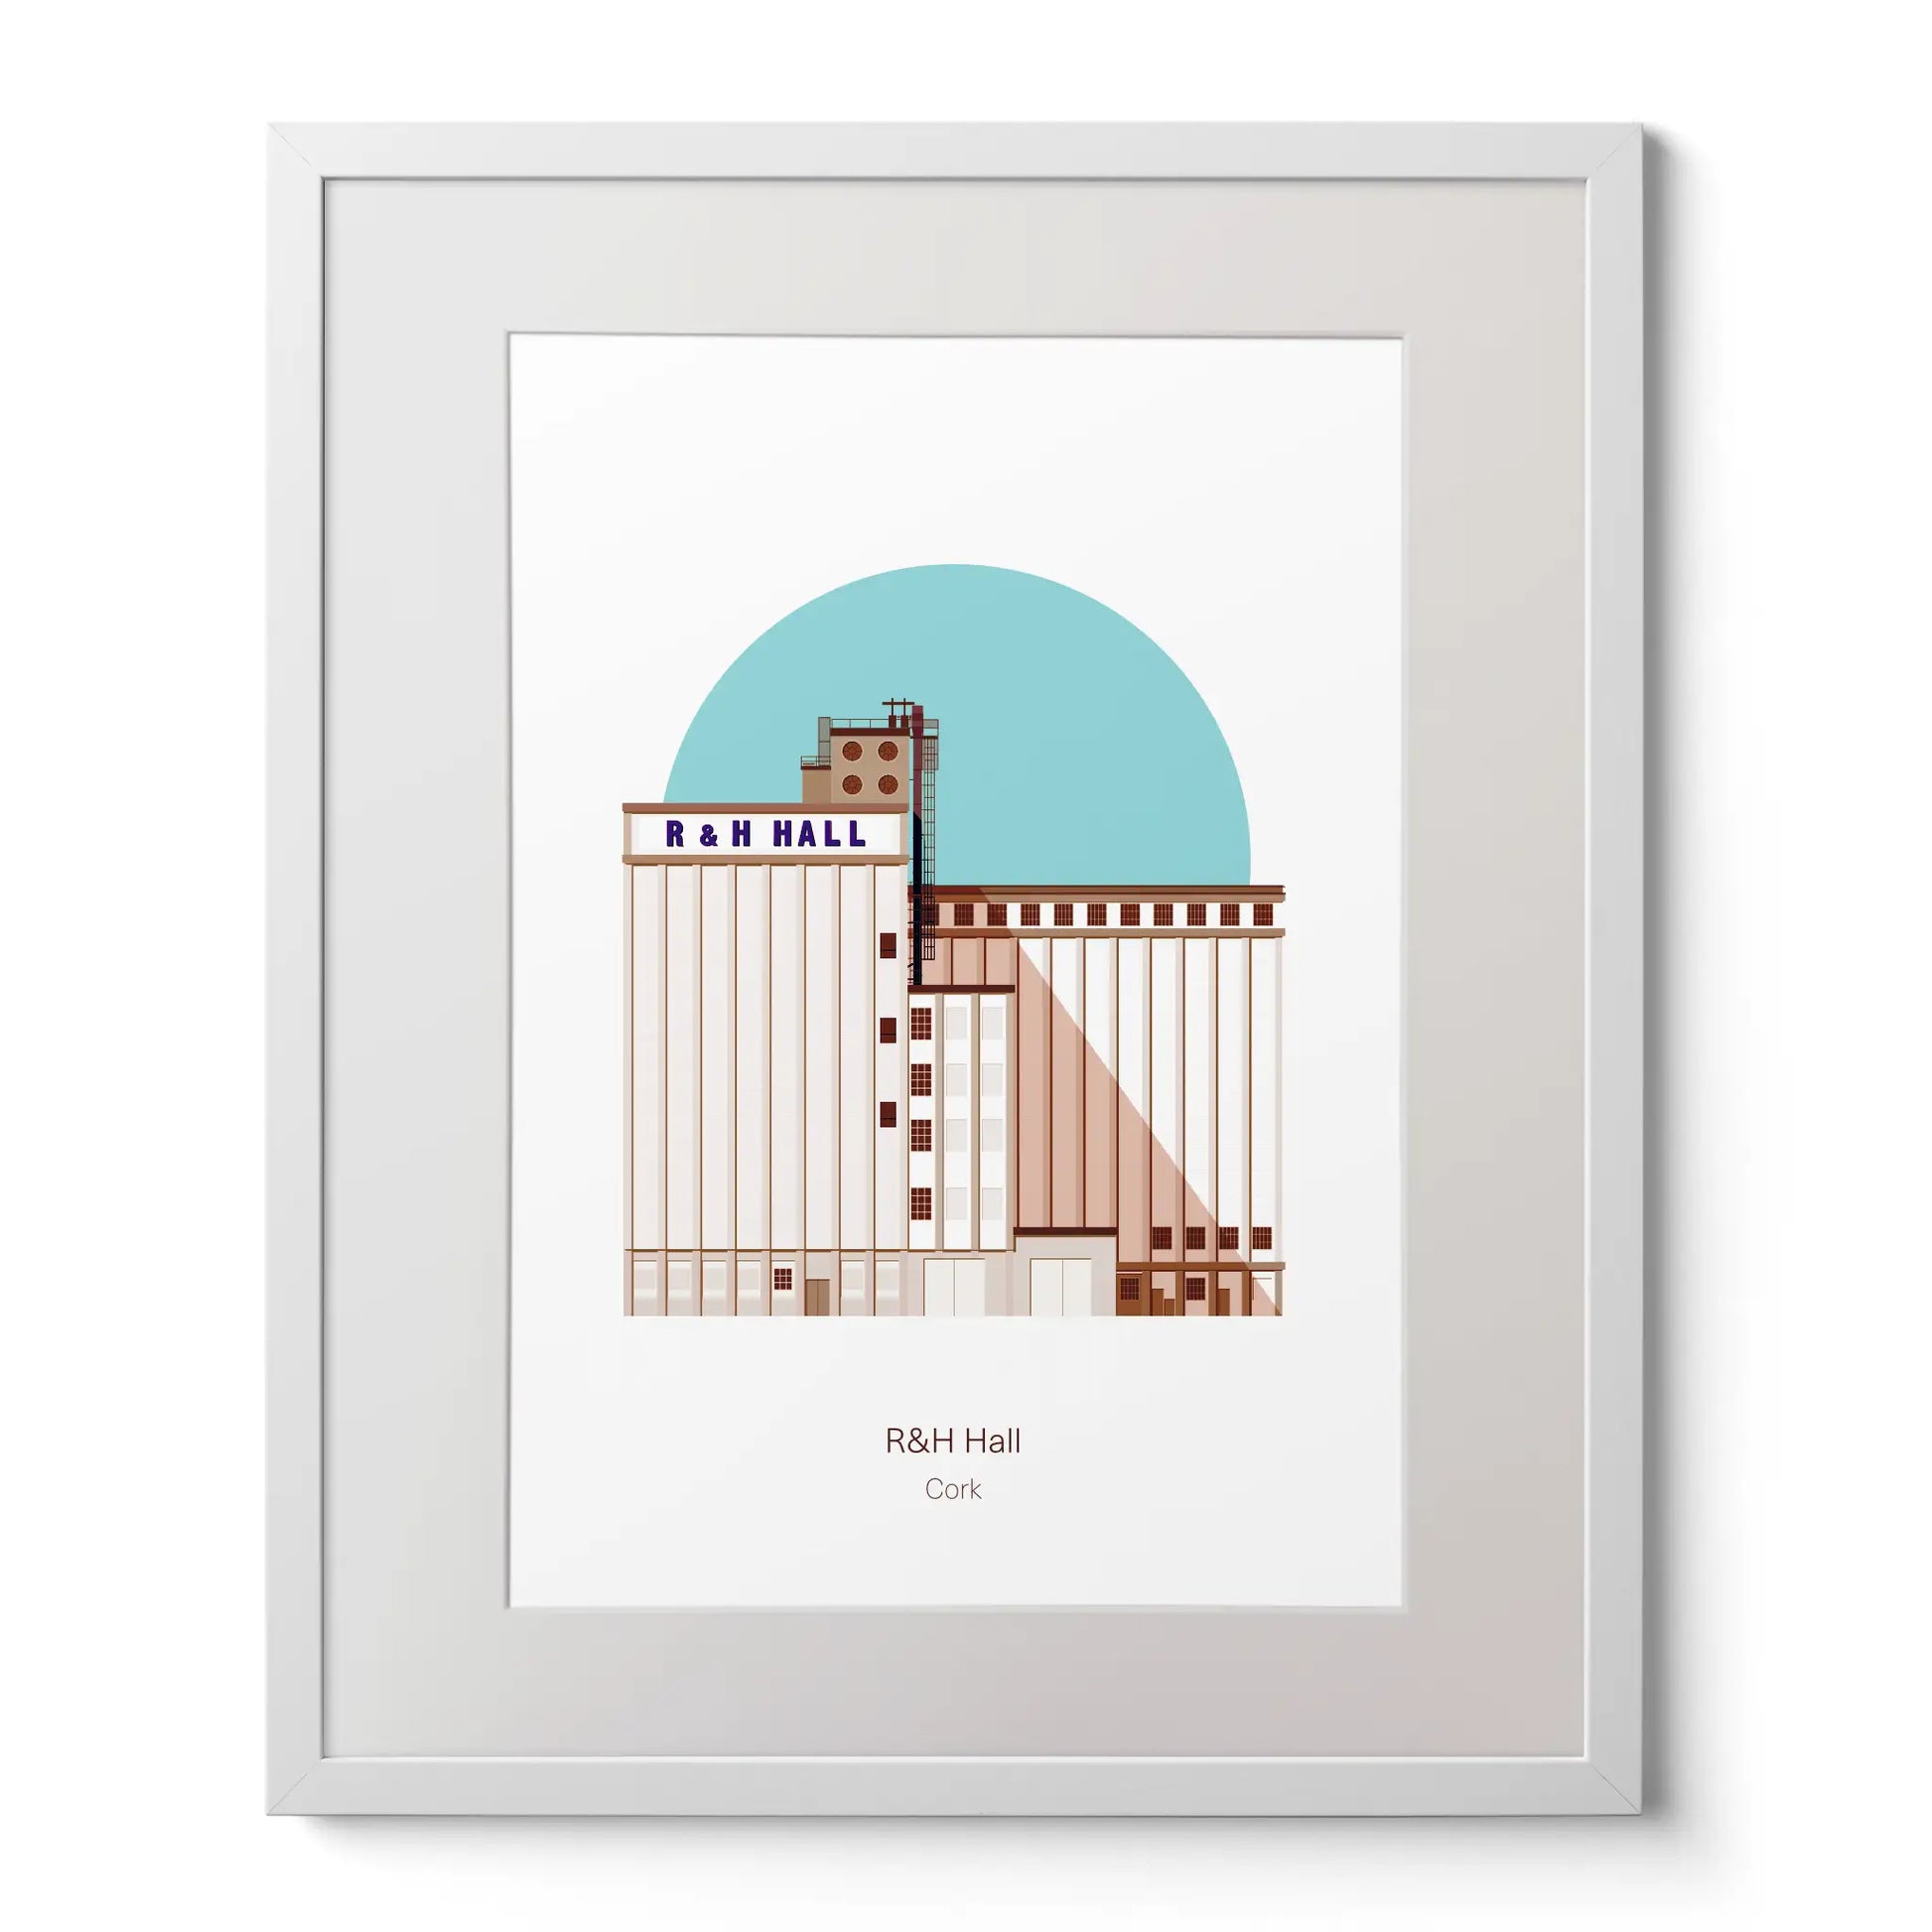 Framed illustrated art print of R&H Hall in Port of Cork, with blue background.